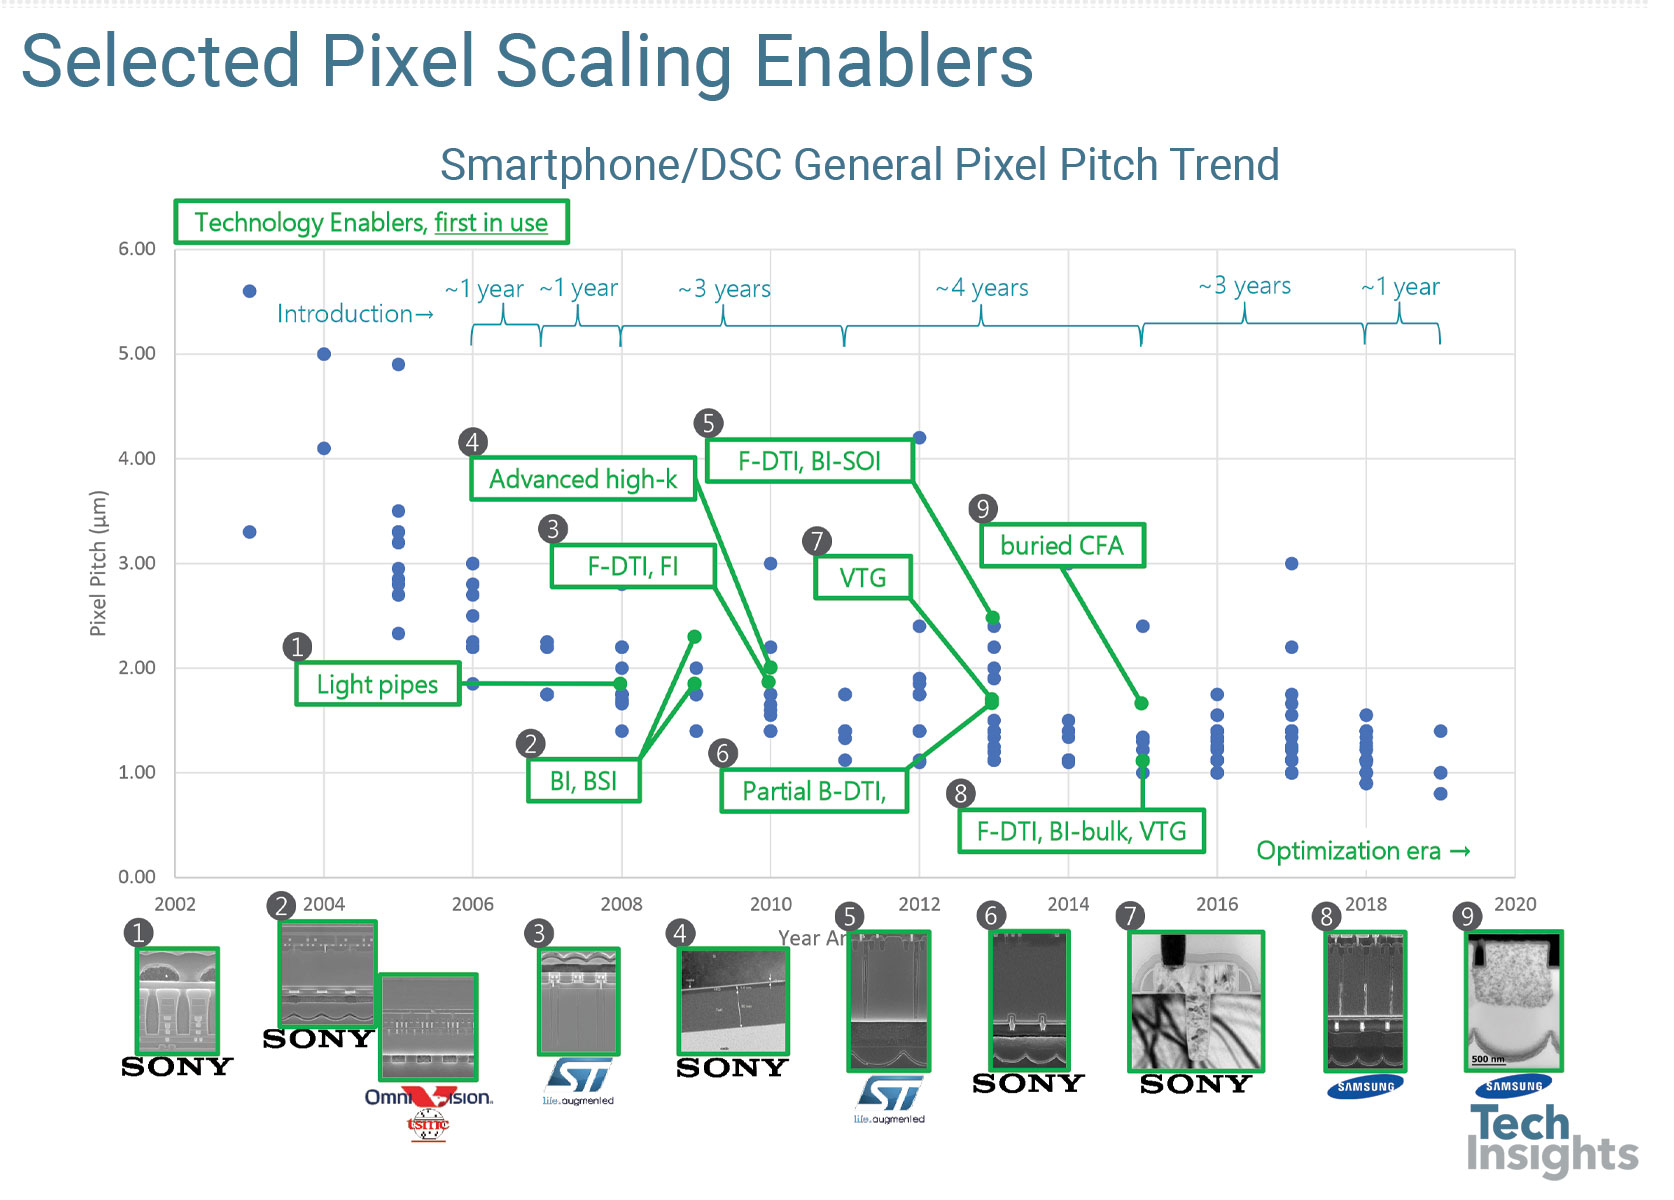 Selected Small Pixel Scaling Enablers